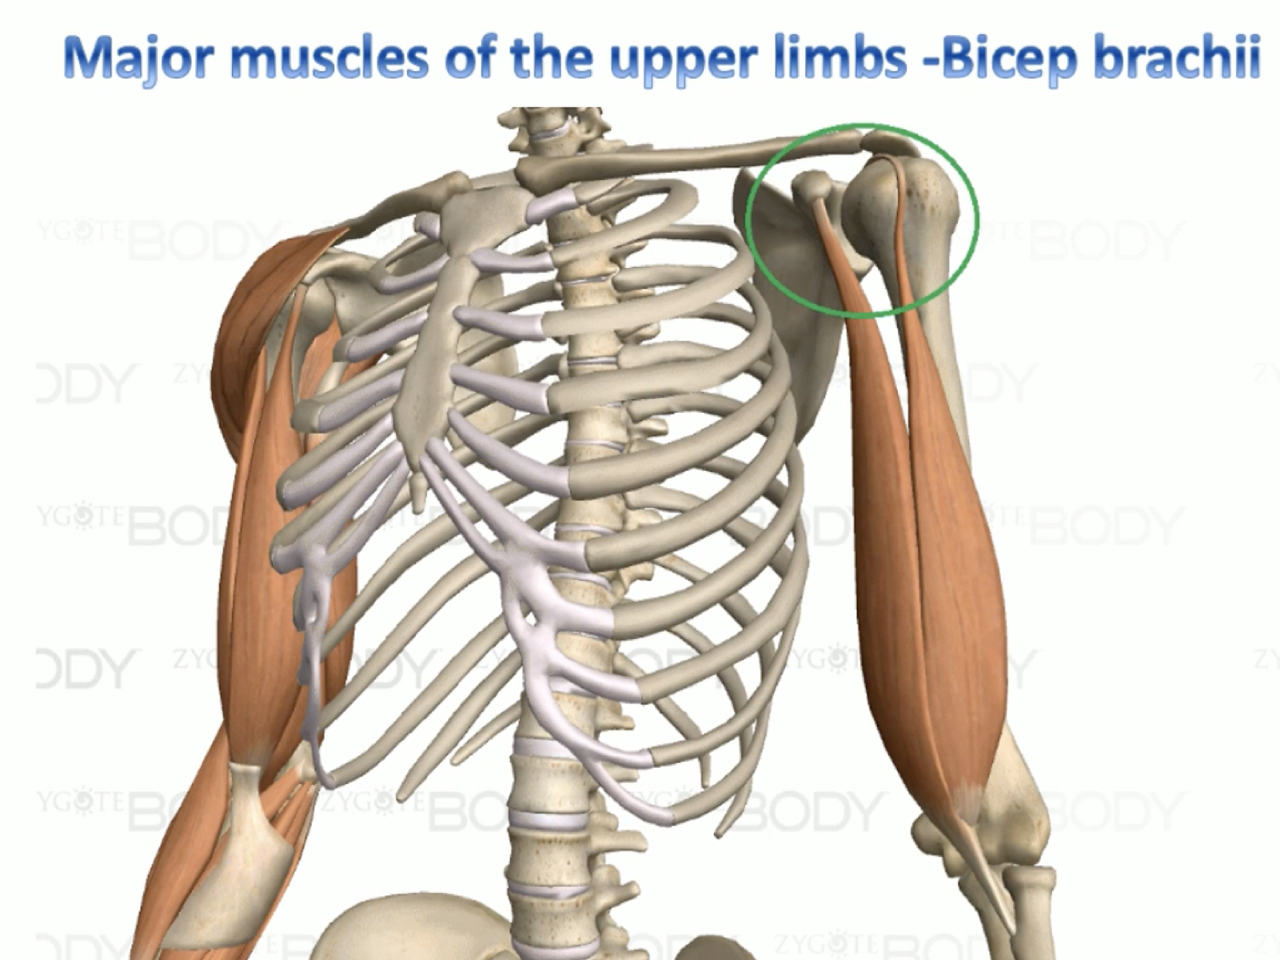 Major muscles of the upper limbs